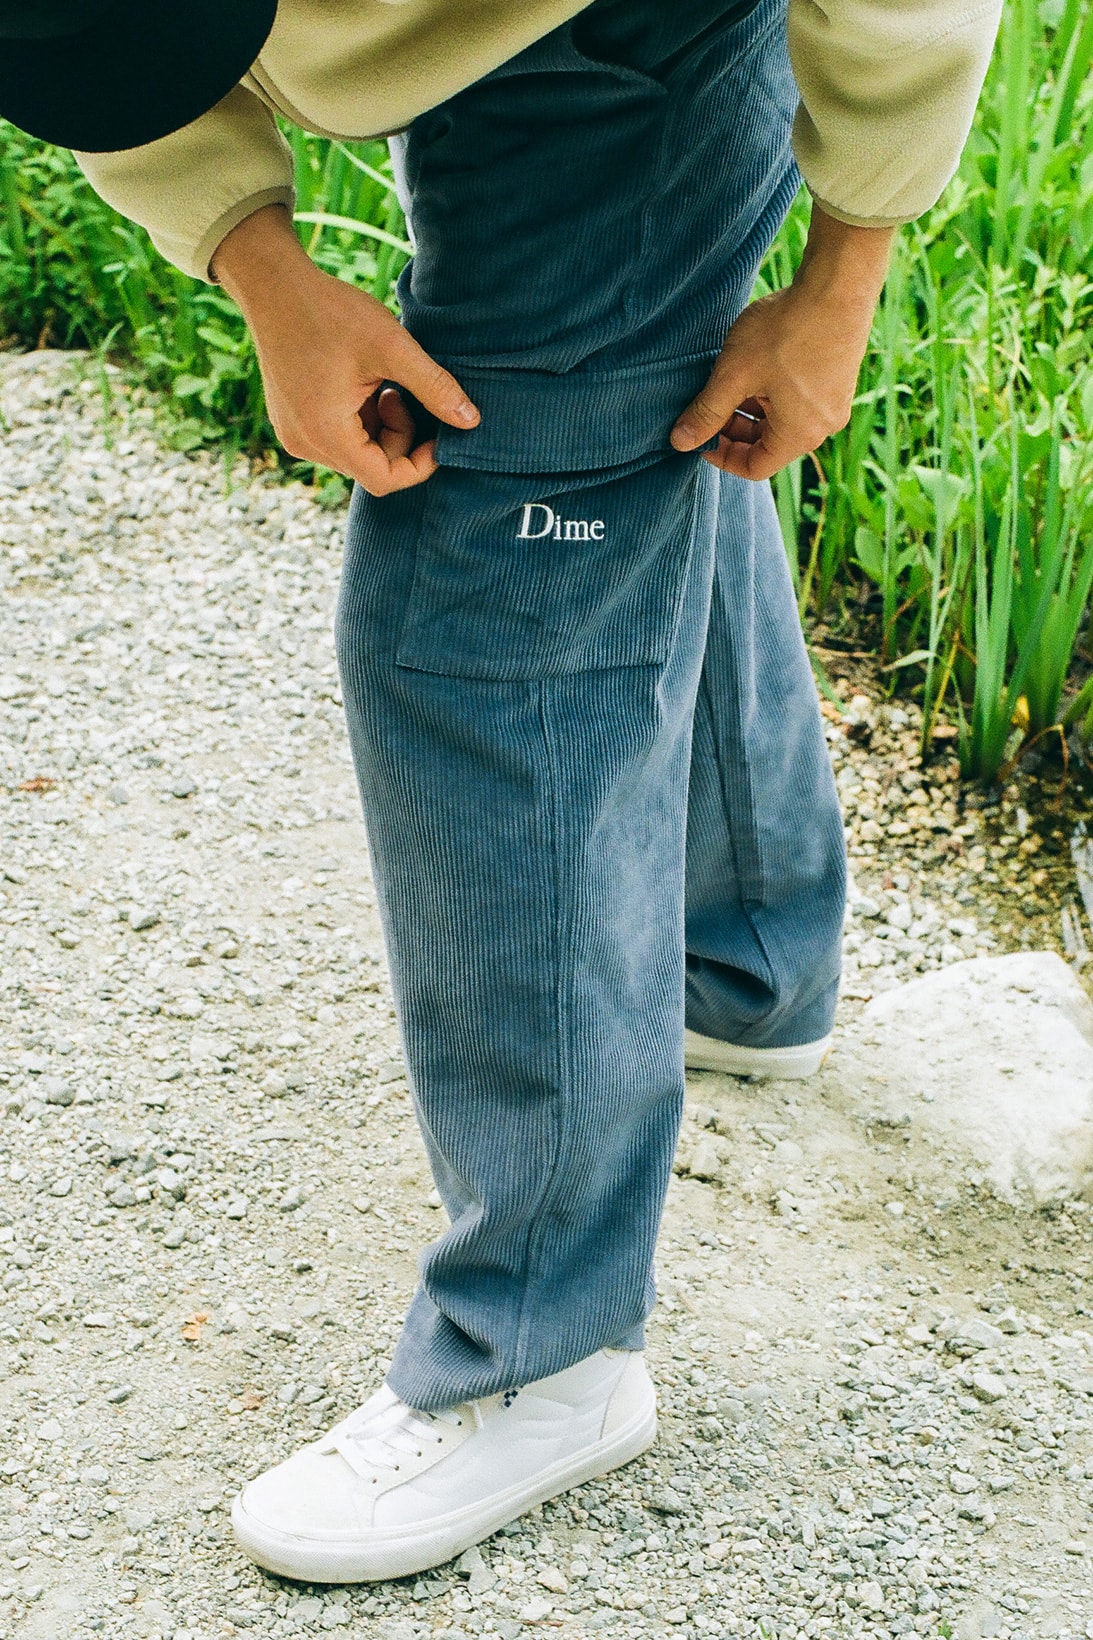 Dime Fall 2021 Drop 1 Collection Lookbook Pants Sneakers